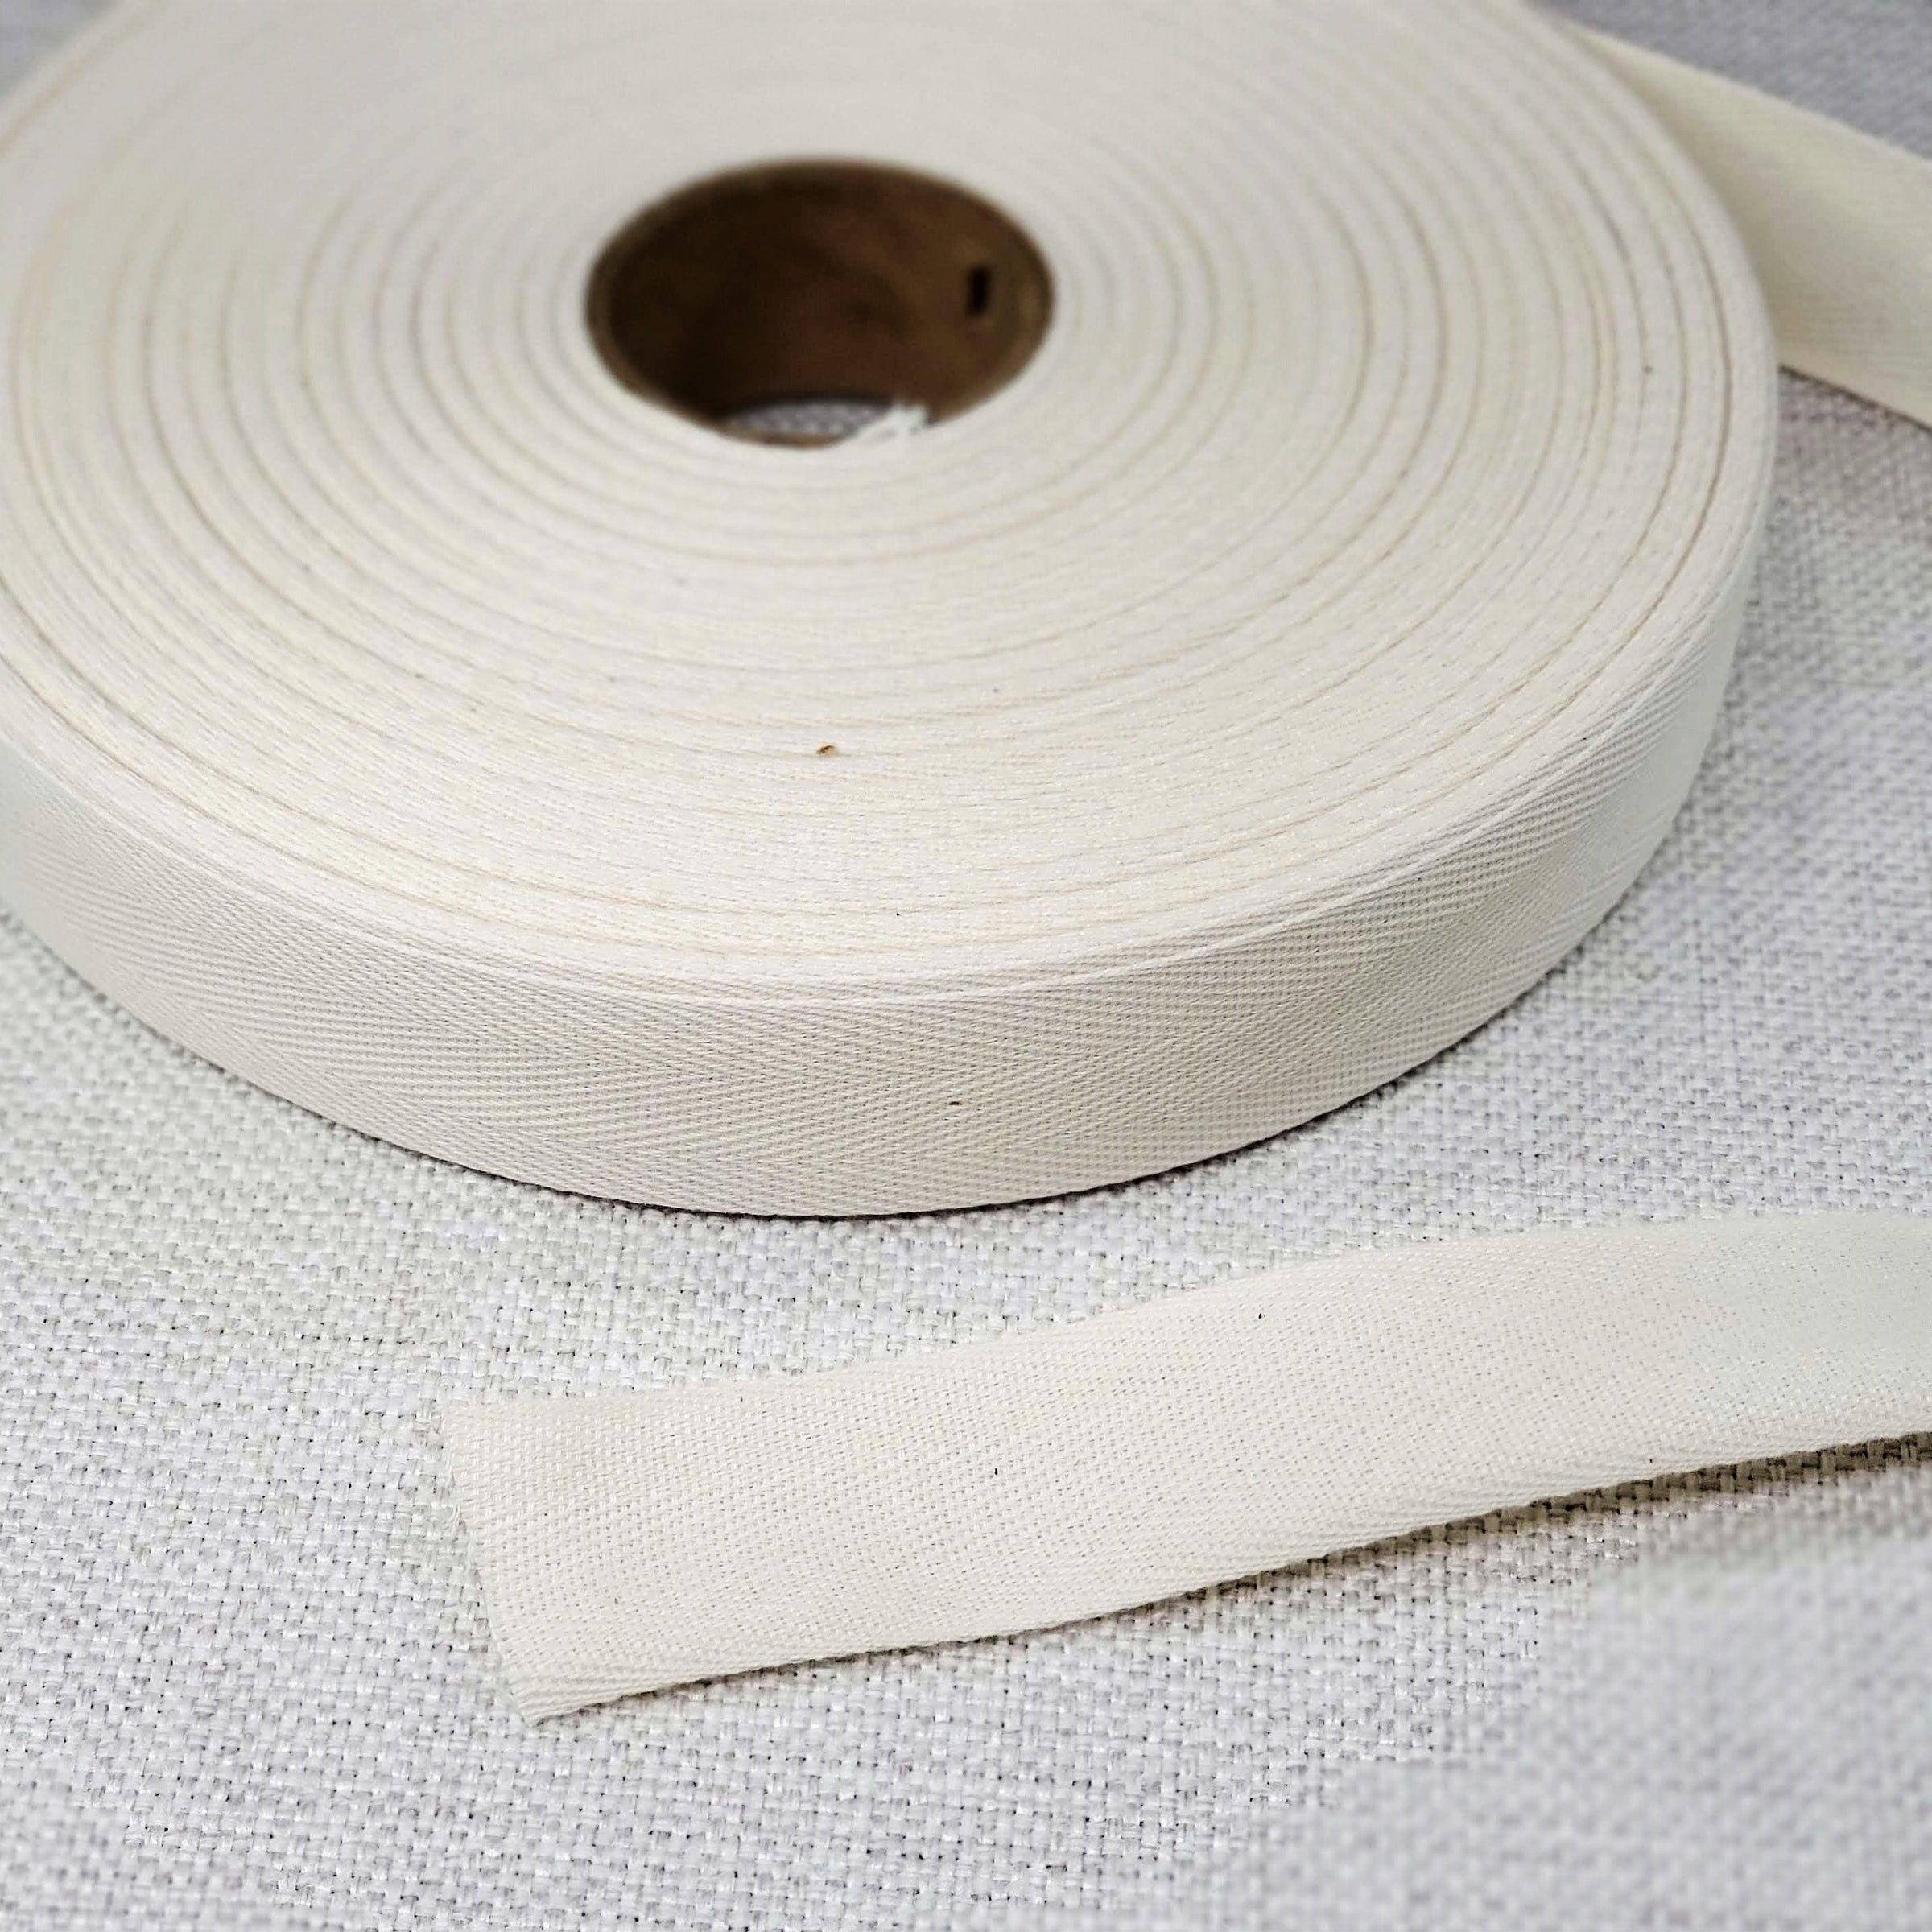 1 Natural Cotton Tape, 100 yards